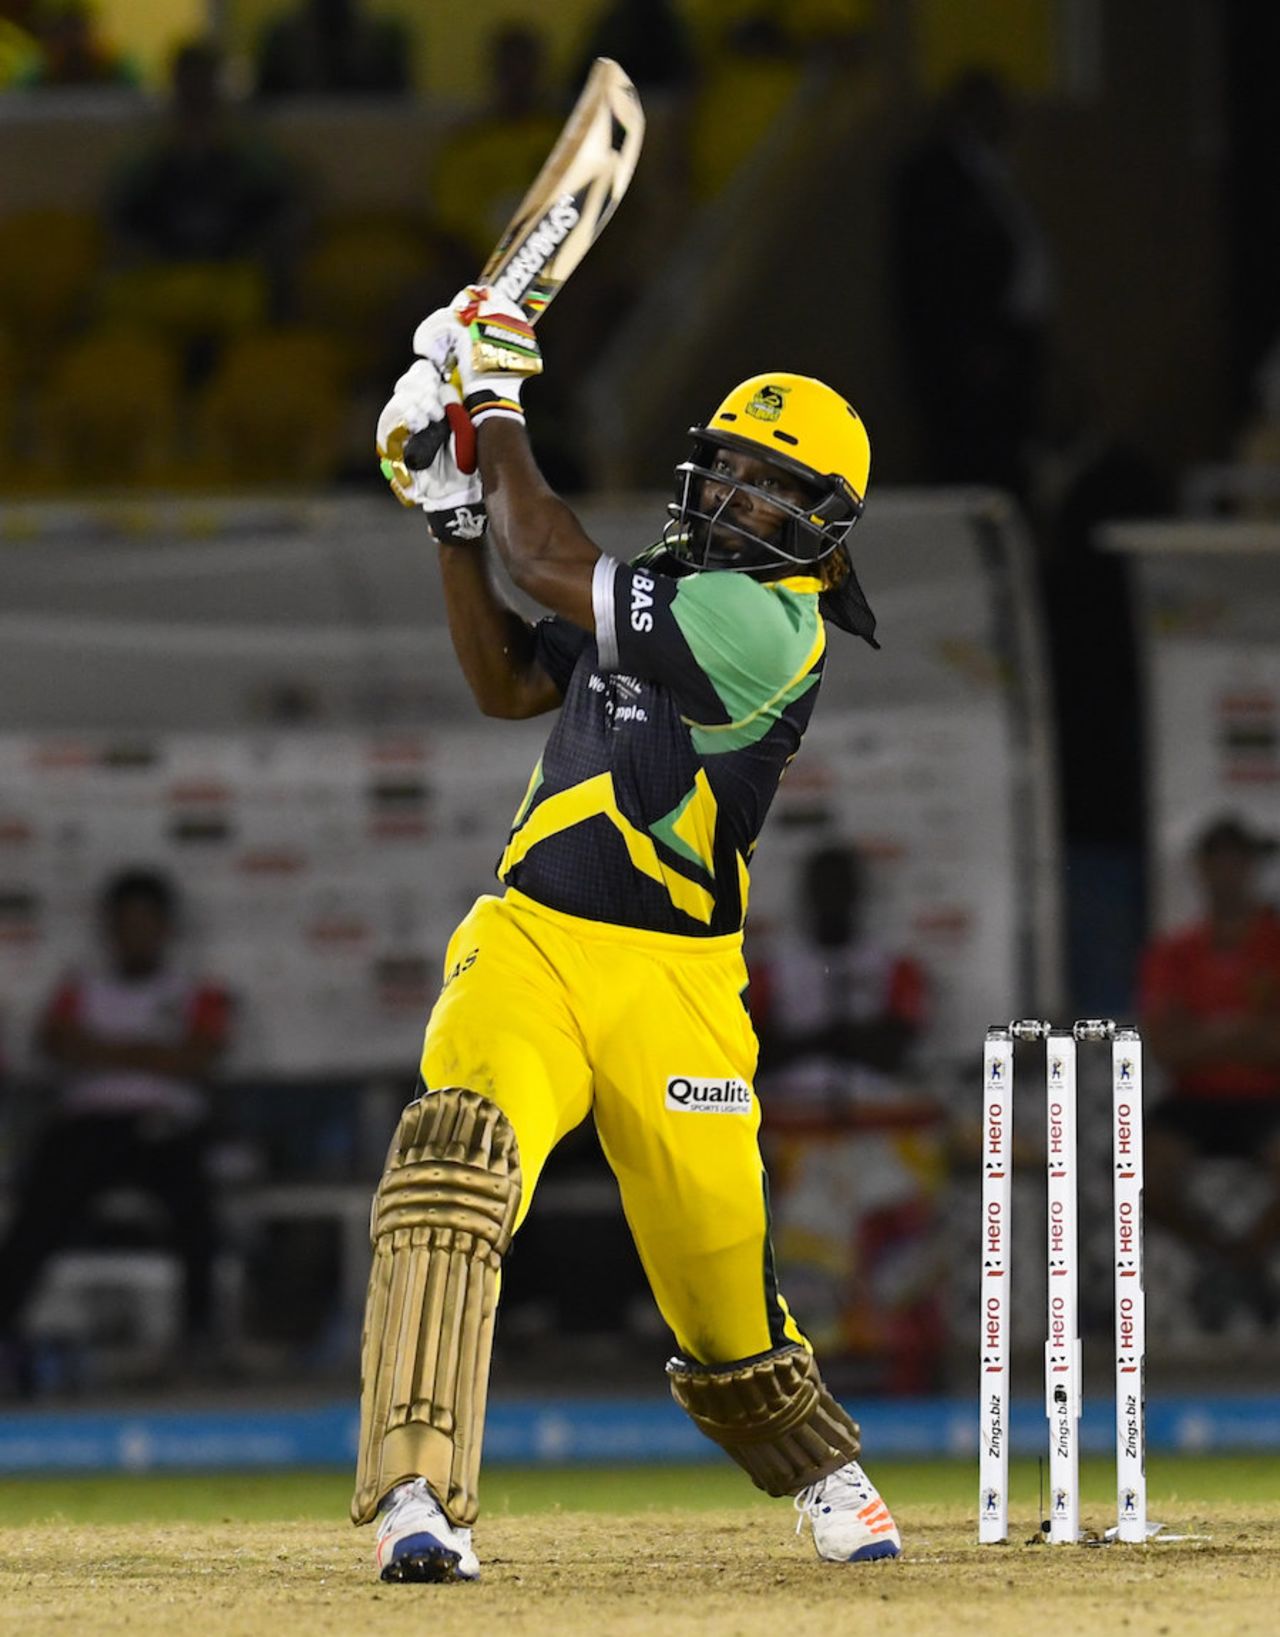 Chris Gayle bludgeons the ball down the ground, Trinbago Knight Riders v Jamaica Tallawahs, CPL 2016, Port of Spain, July 4, 2016